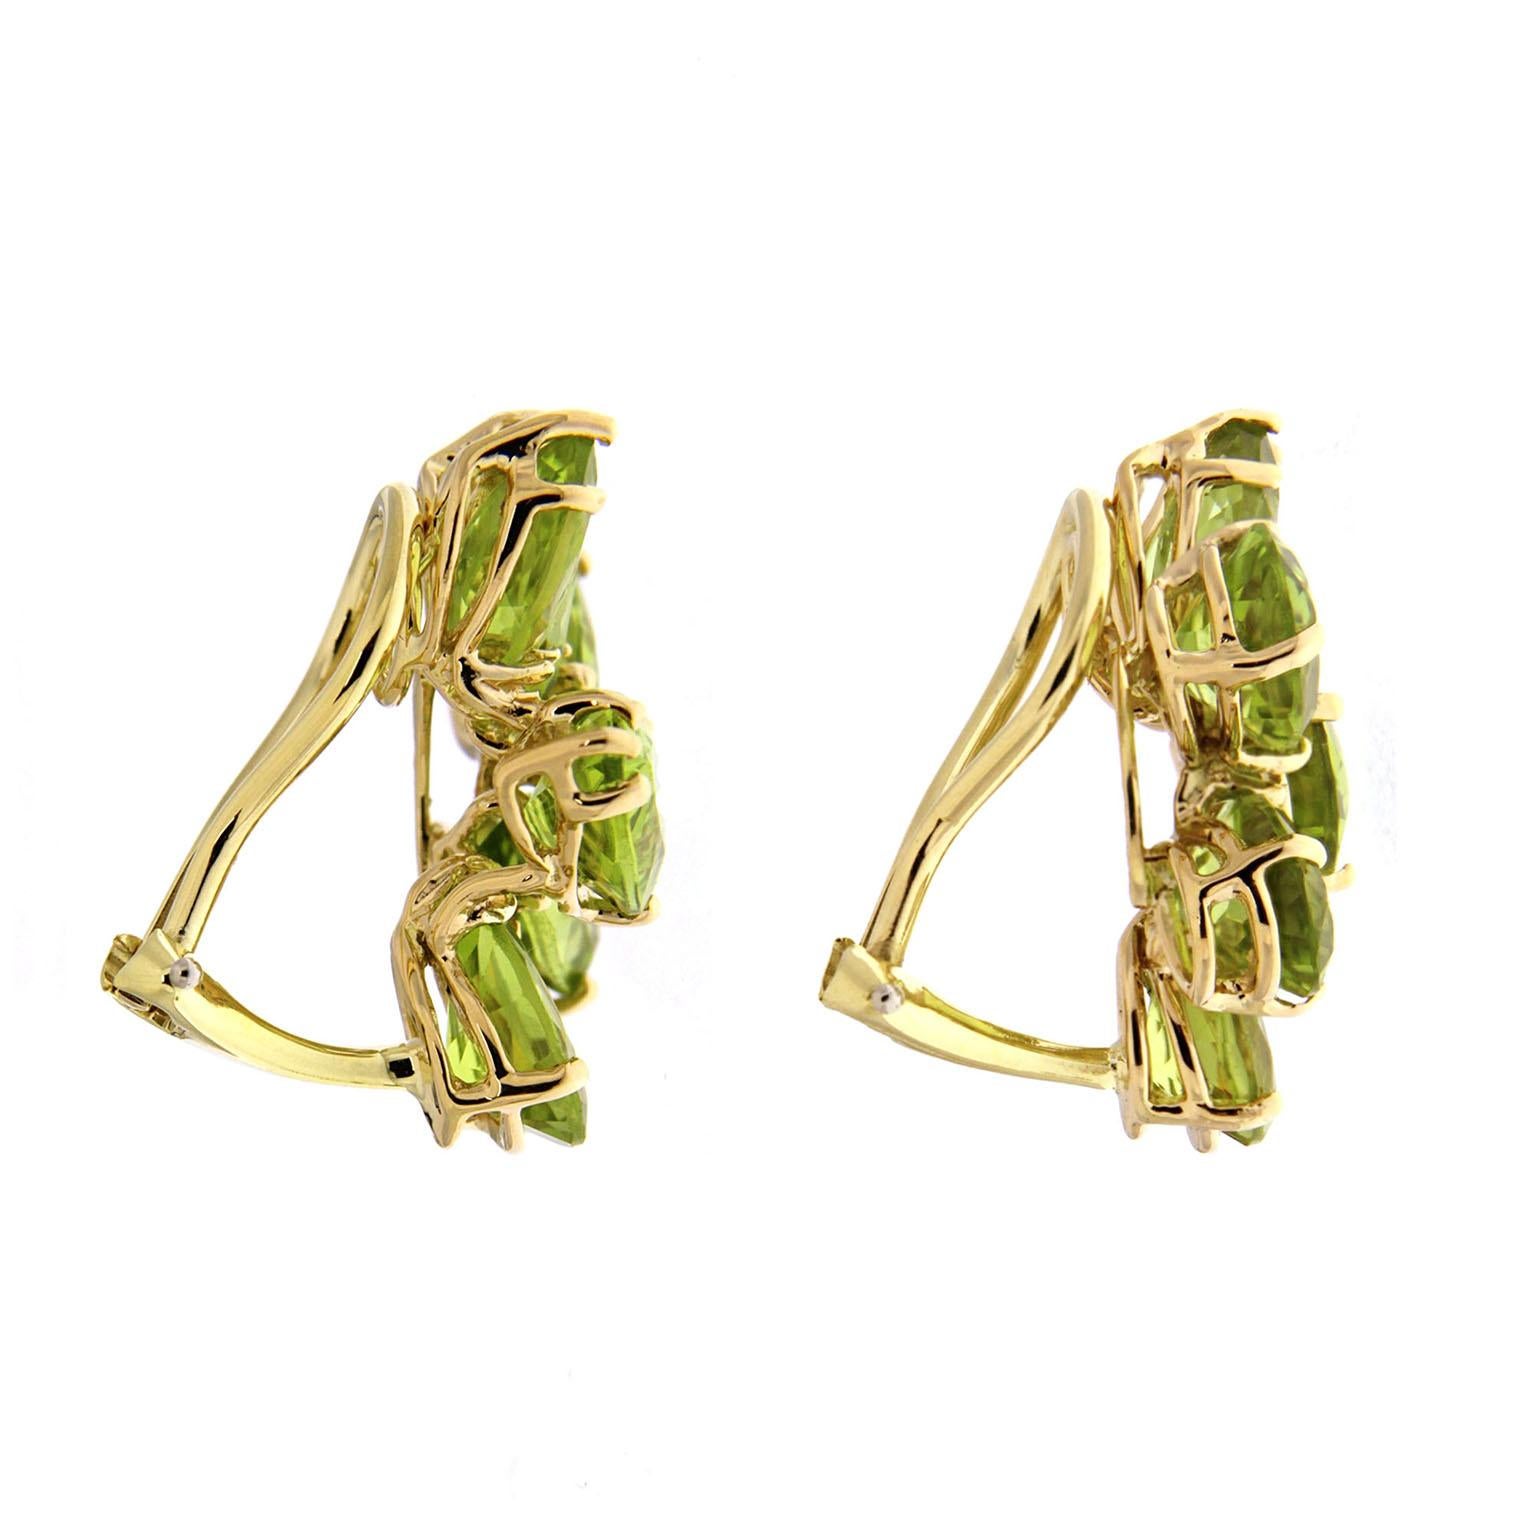 Modern Valentin Magro Pear and Marquise Peridot Earrings